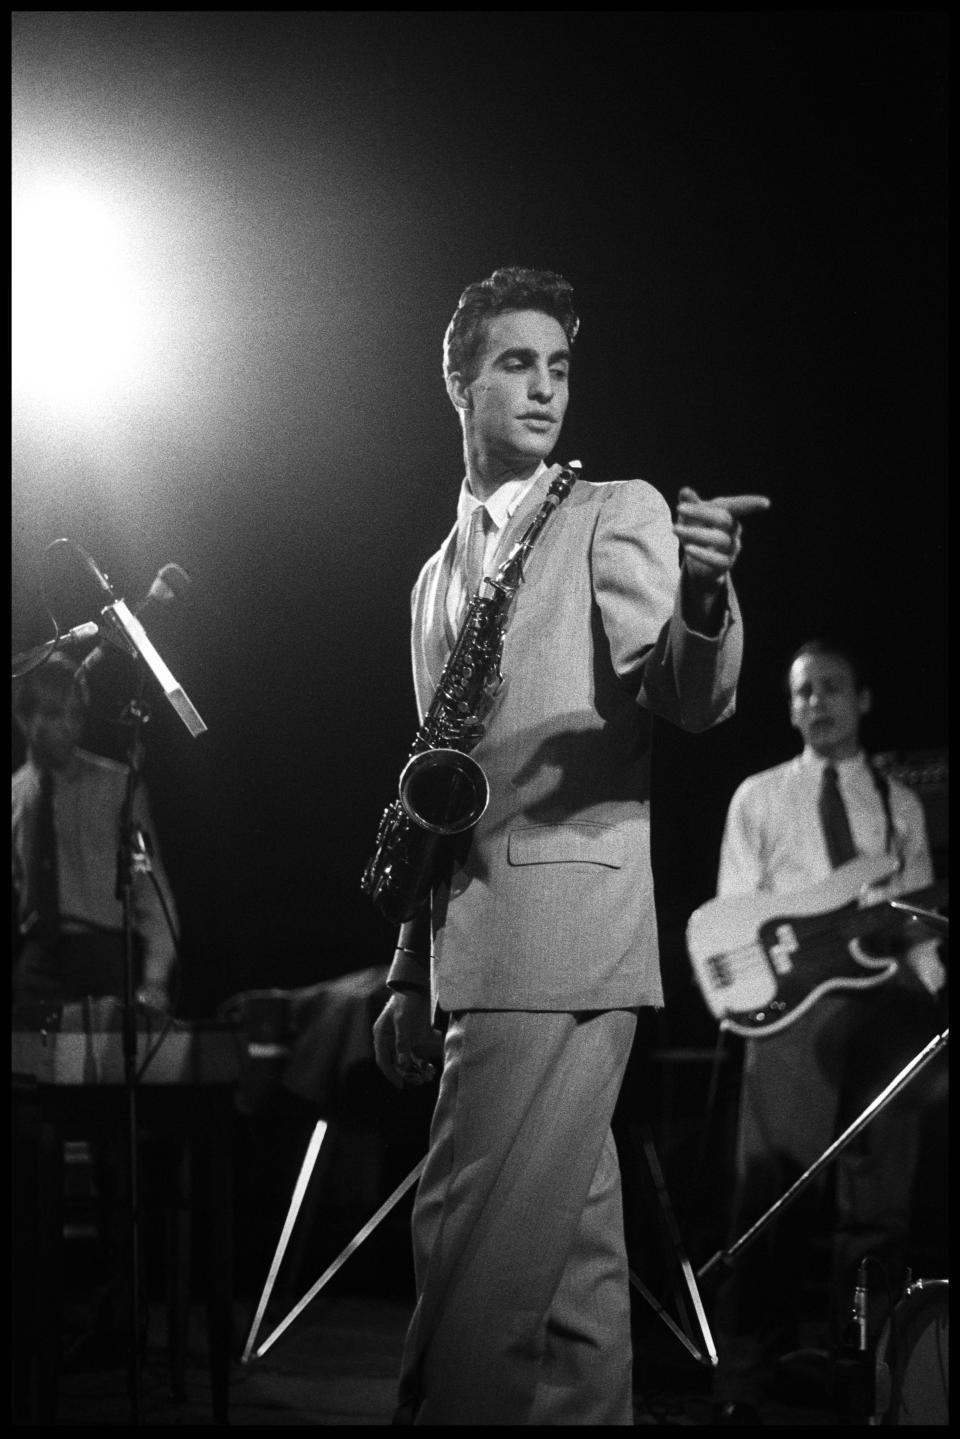 Lurie onstage with his band the Lounge Lizards in 1981